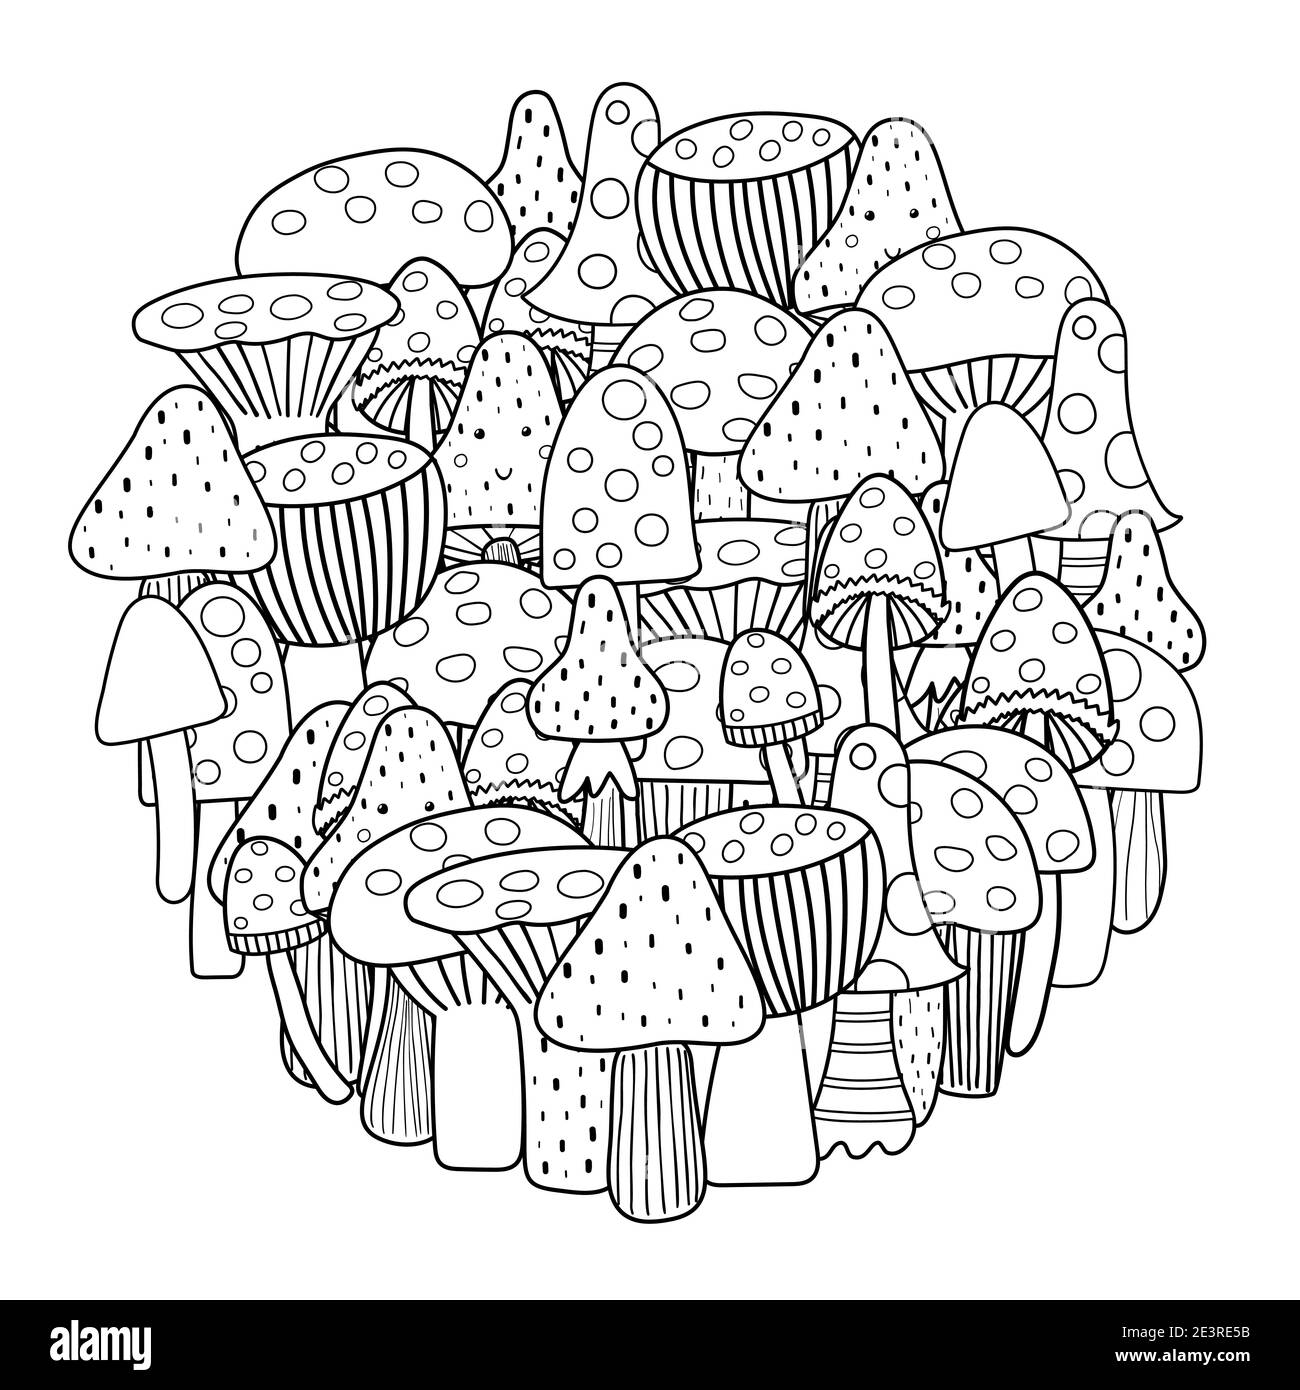 Circle shape coloring page with mushrooms. Black and white cute print Stock Vector